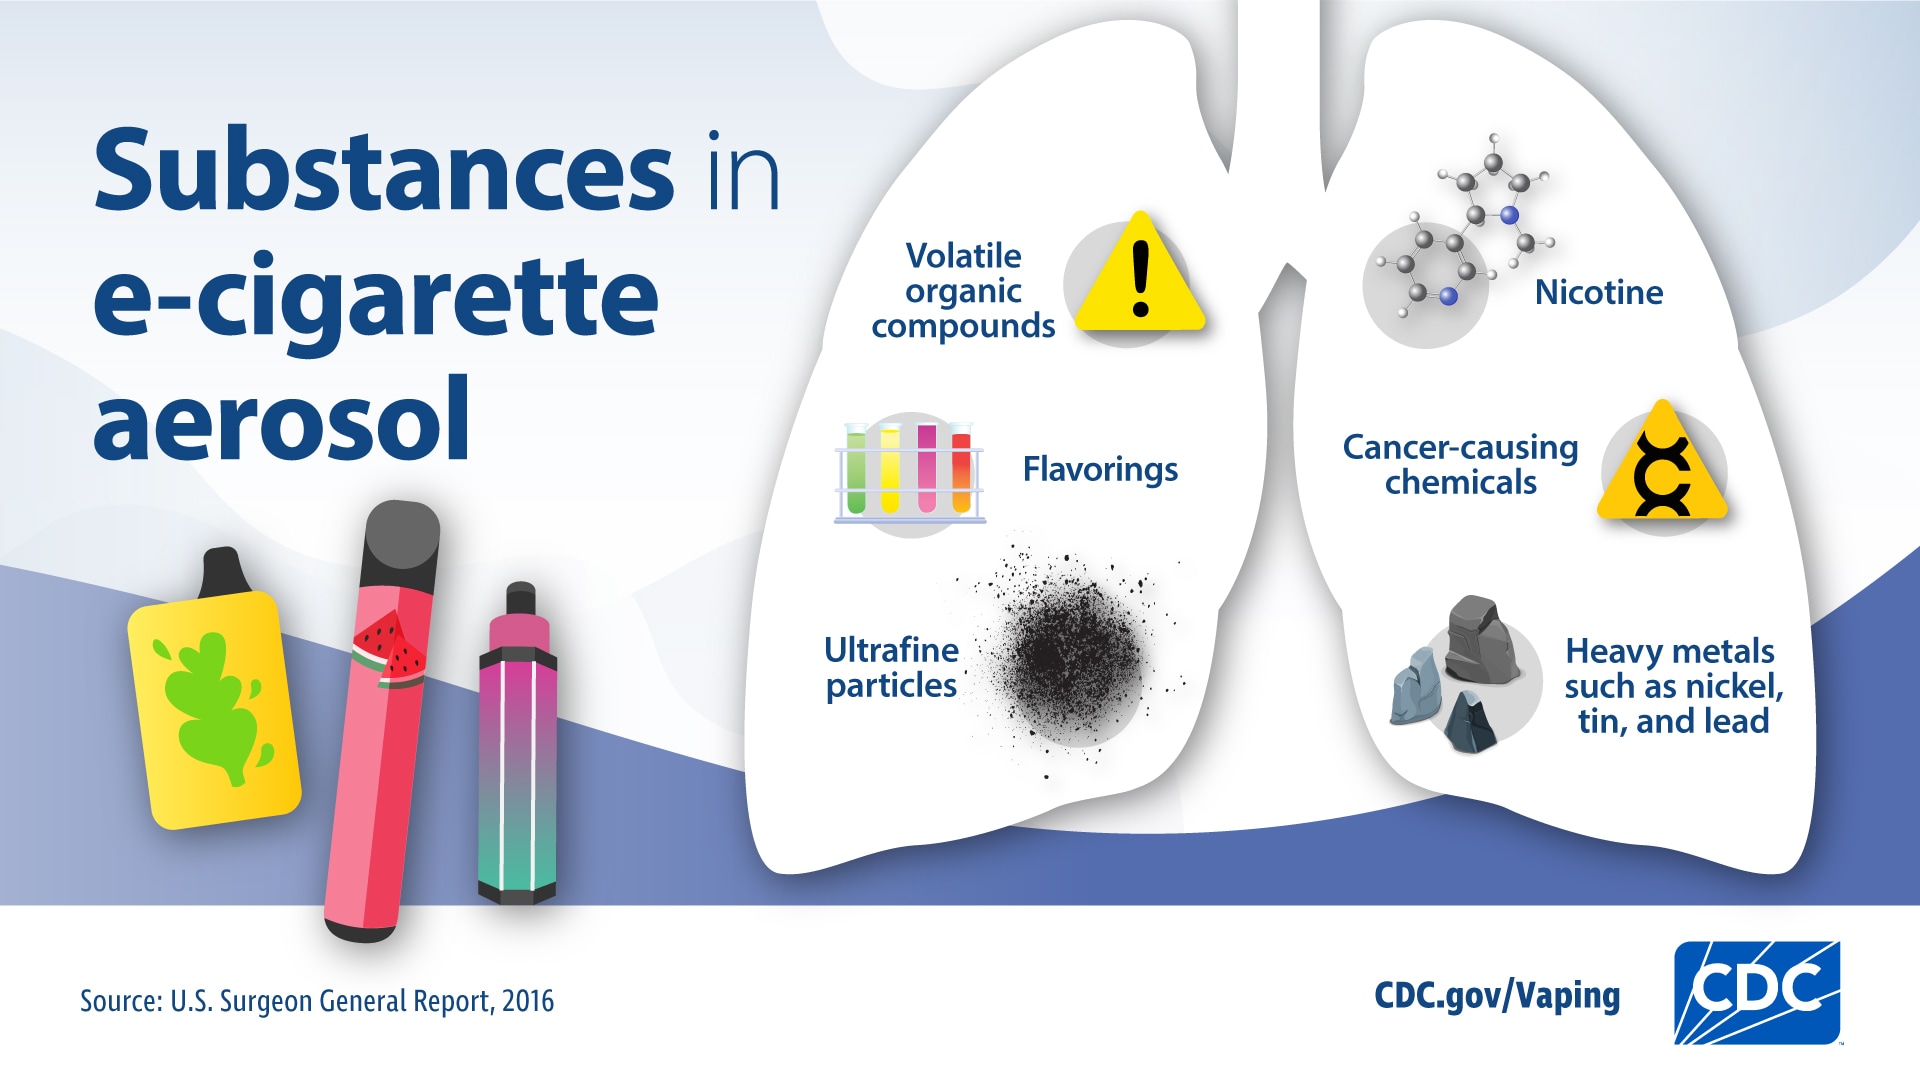 Visual depiction of harmful and potentially harmful substances that can be found in e-cigarettes